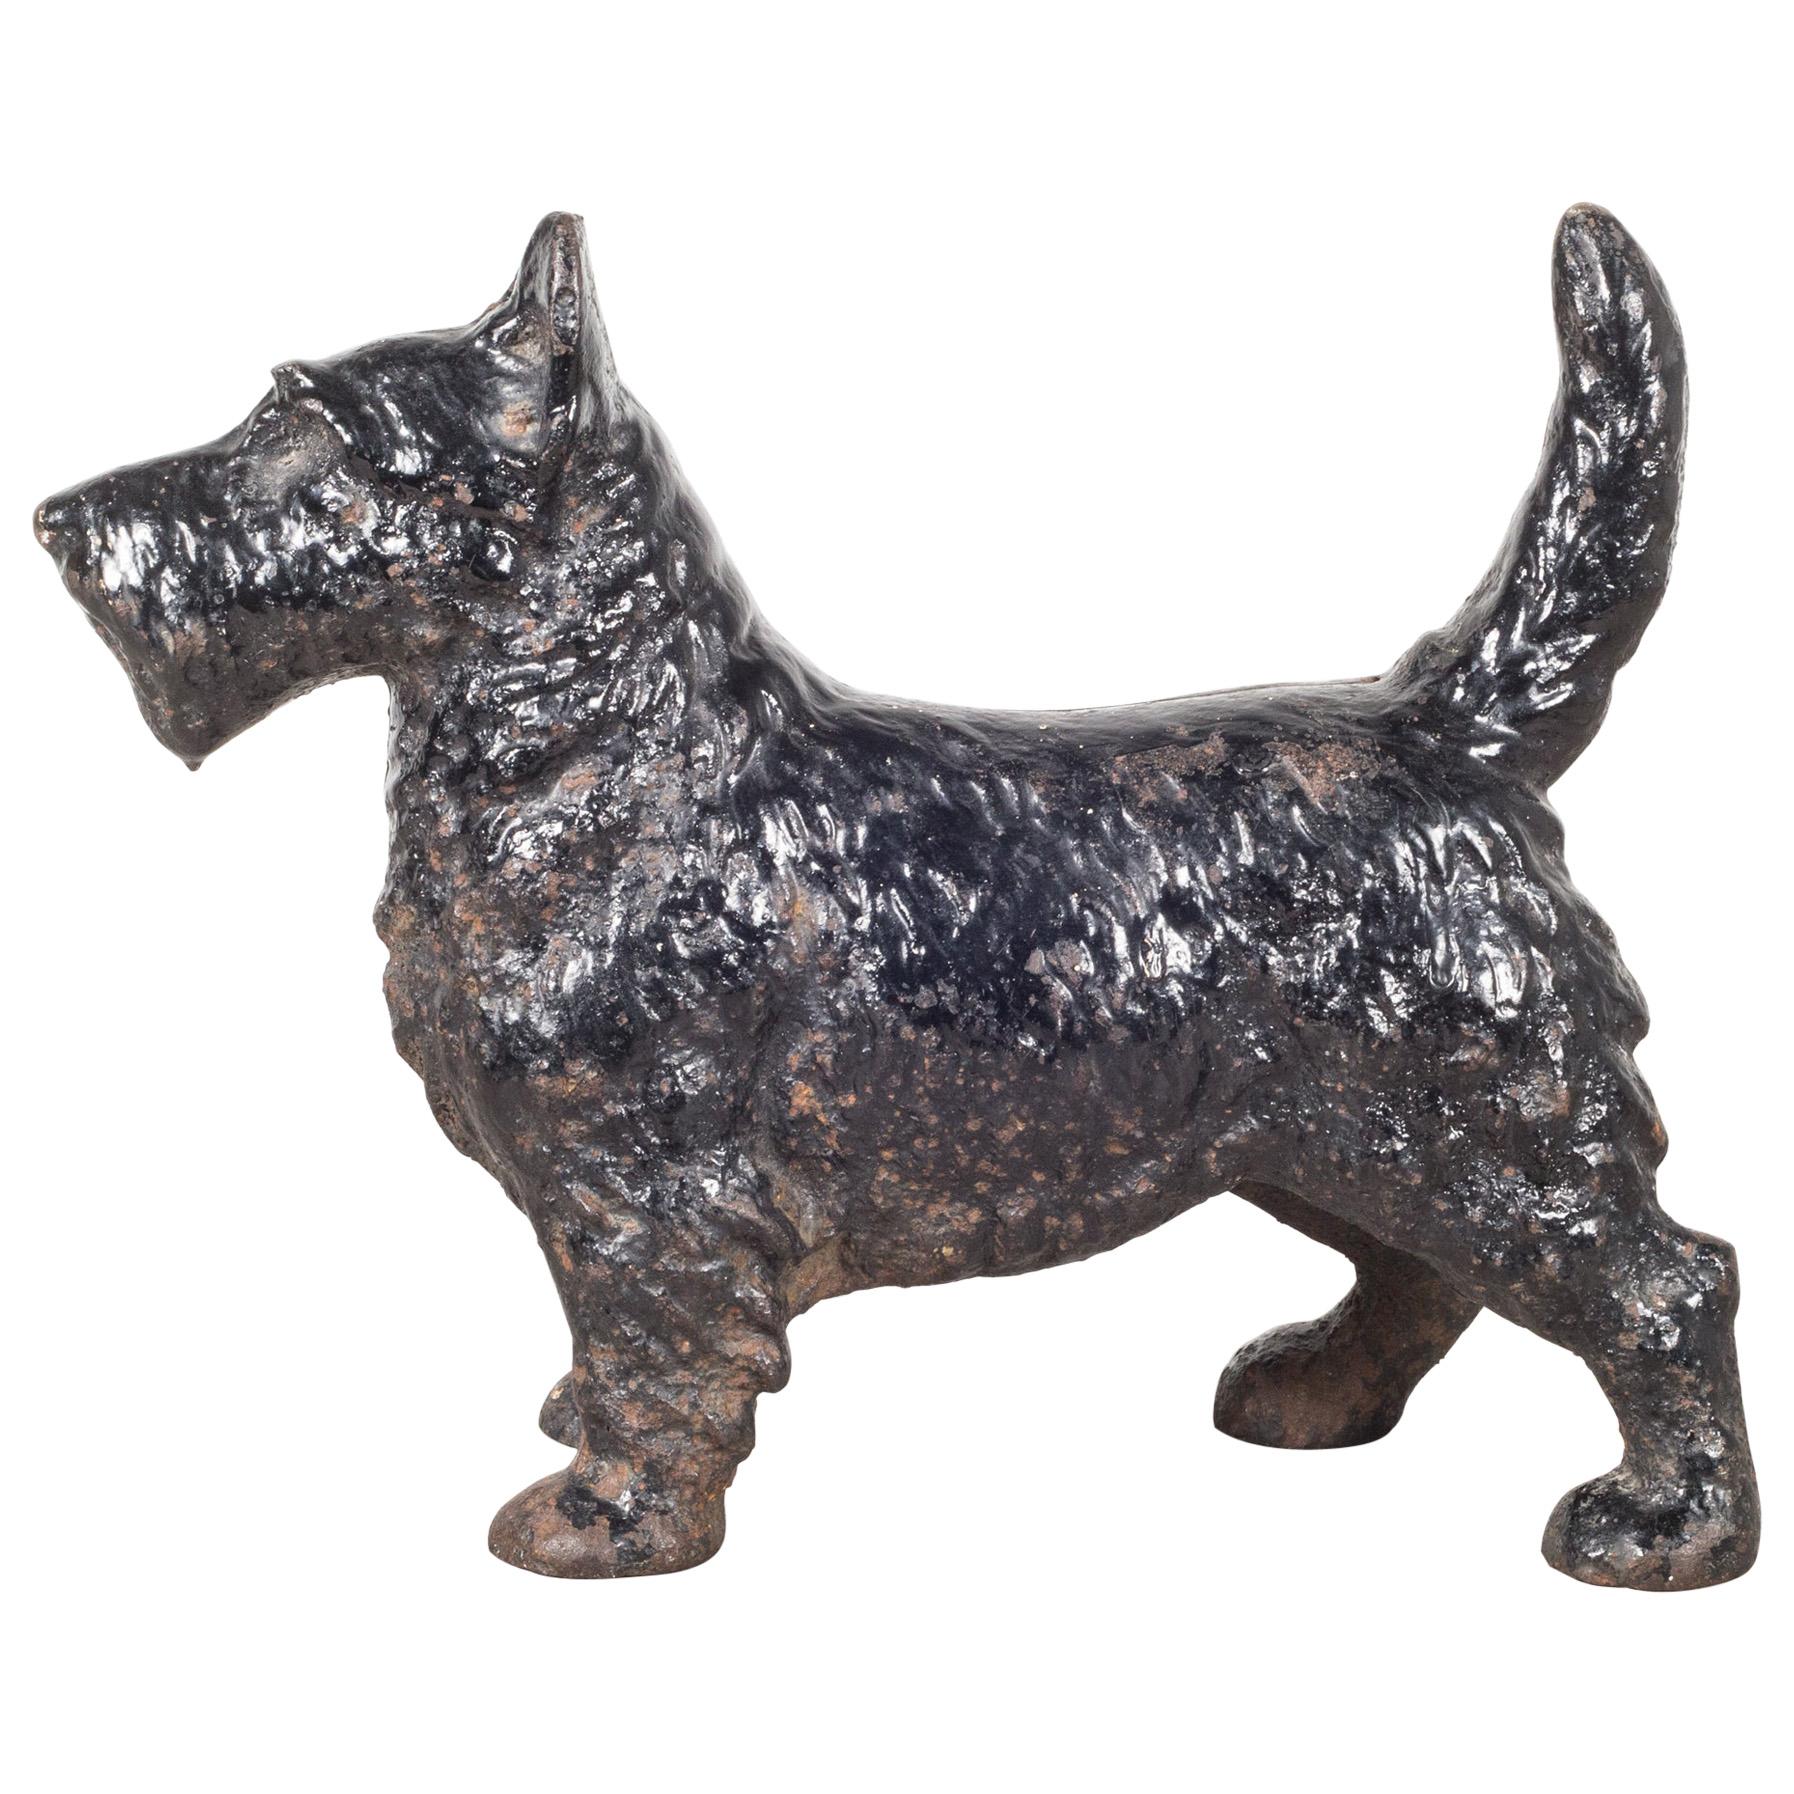 Early 20th C. Cast Iron Scottish Terrier Doorstop by Hubley, c.1910-1940